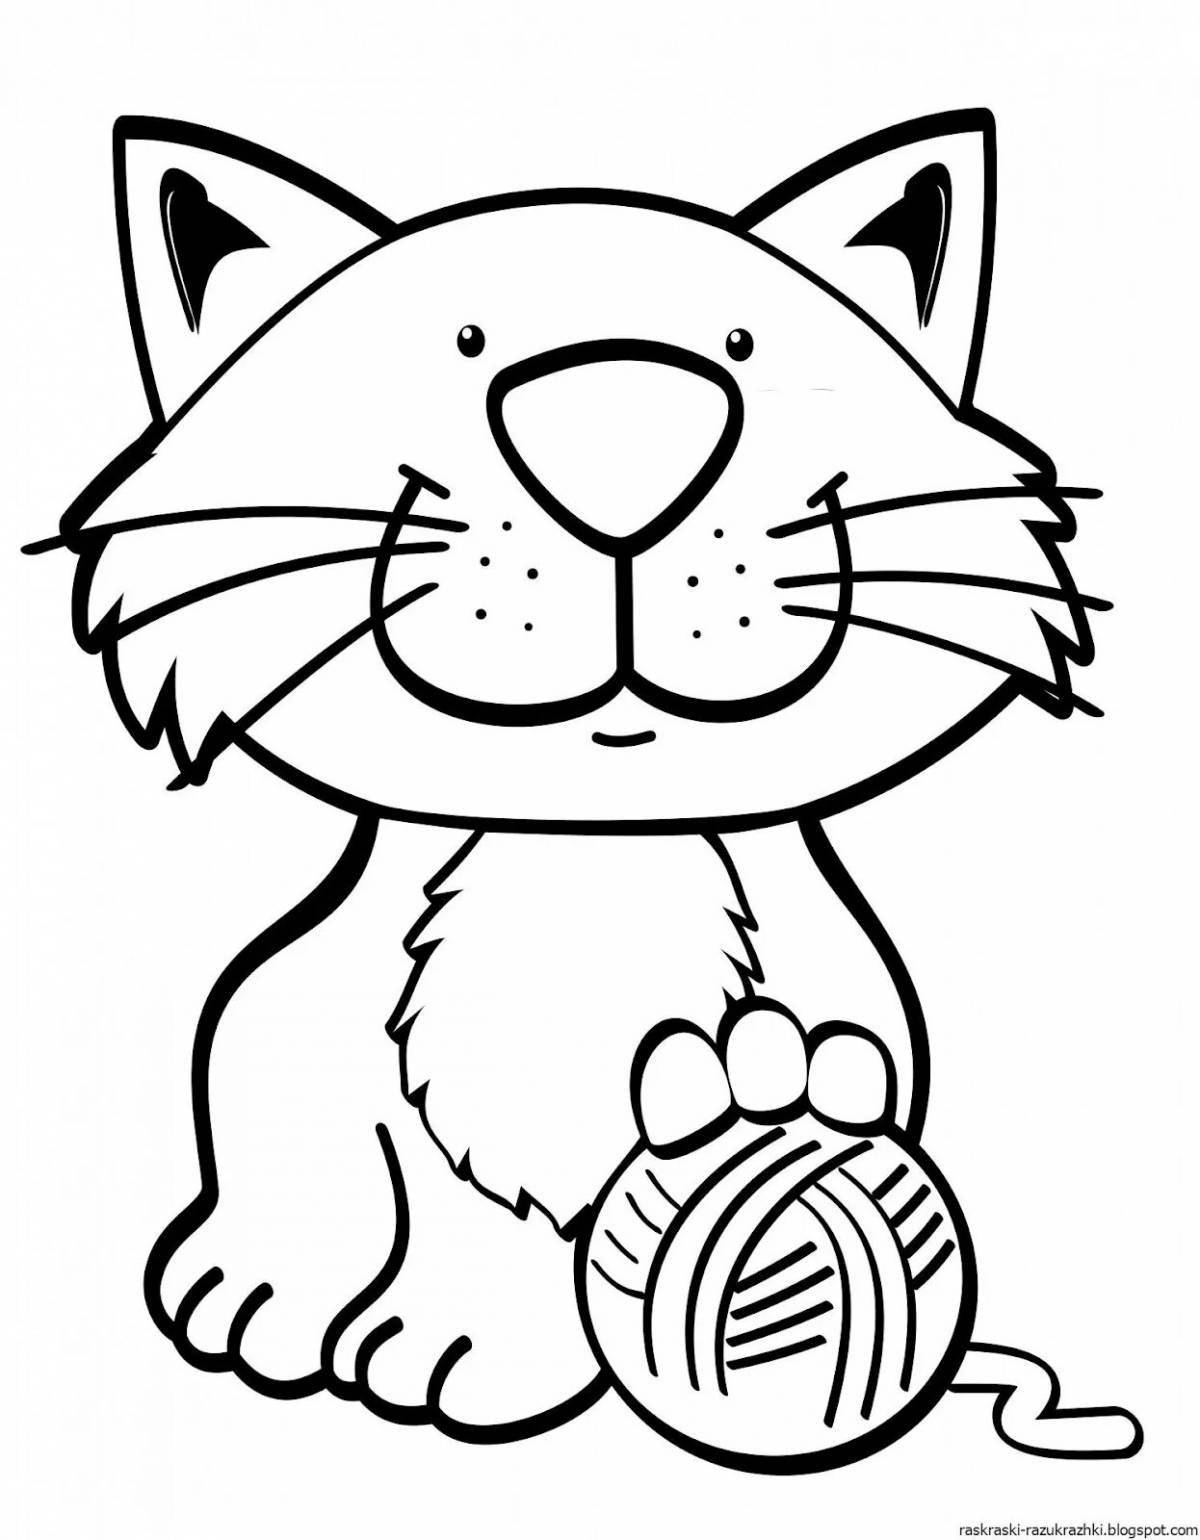 Live cat coloring pages for kids